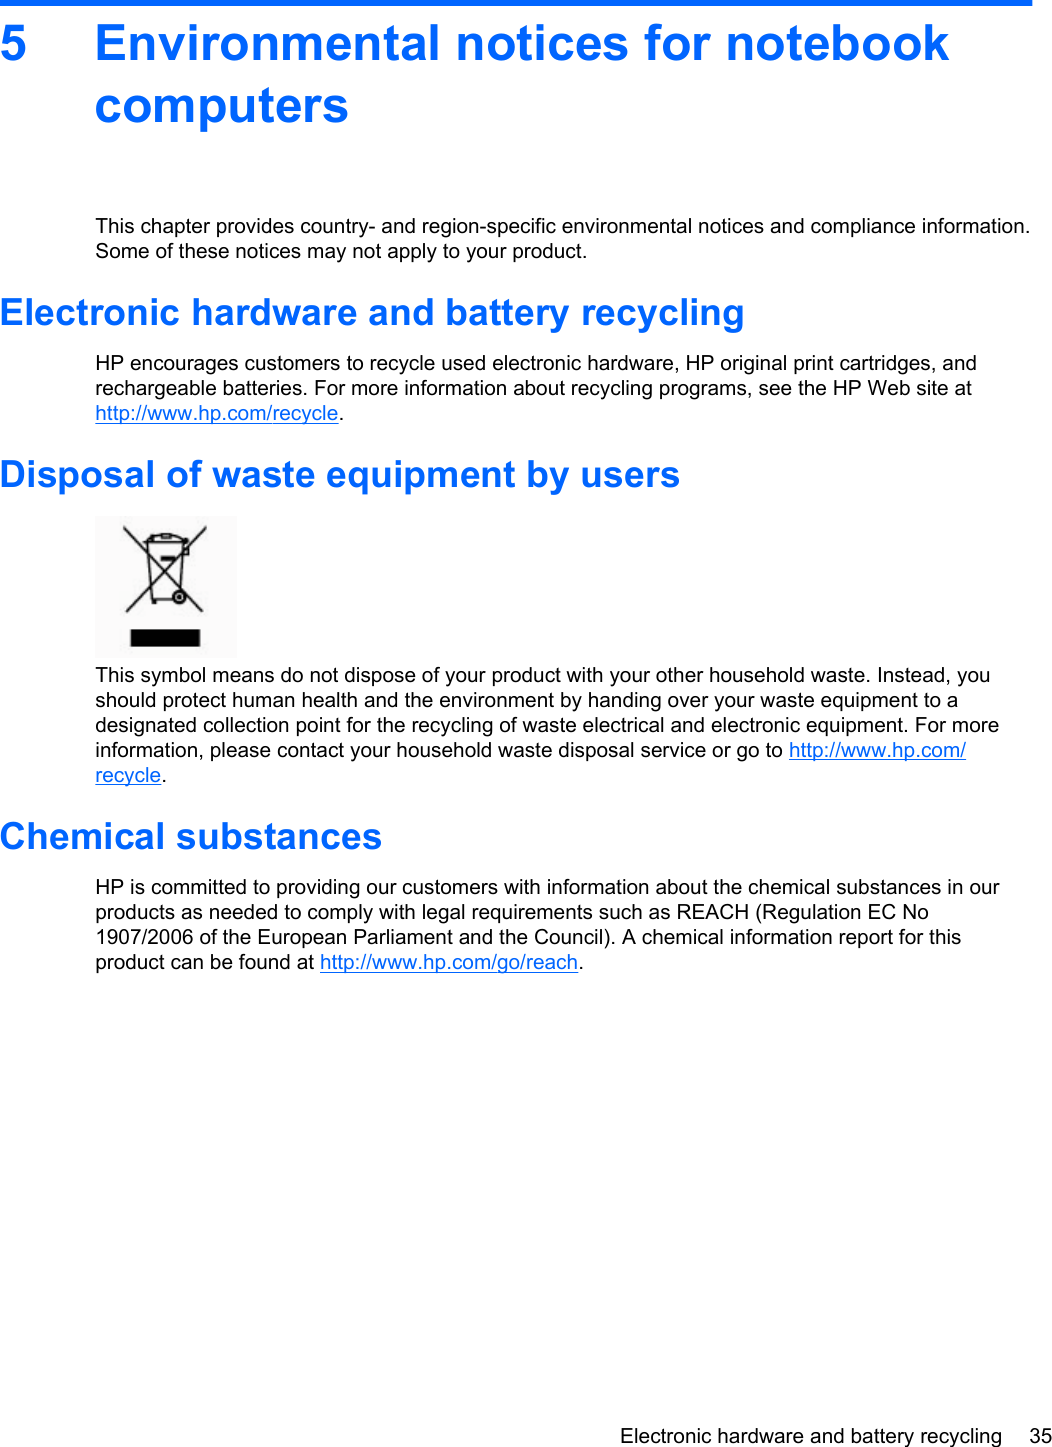 5 Environmental notices for notebookcomputersThis chapter provides country- and region-specific environmental notices and compliance information.Some of these notices may not apply to your product.Electronic hardware and battery recyclingHP encourages customers to recycle used electronic hardware, HP original print cartridges, andrechargeable batteries. For more information about recycling programs, see the HP Web site athttp://www.hp.com/recycle.Disposal of waste equipment by usersThis symbol means do not dispose of your product with your other household waste. Instead, youshould protect human health and the environment by handing over your waste equipment to adesignated collection point for the recycling of waste electrical and electronic equipment. For moreinformation, please contact your household waste disposal service or go to http://www.hp.com/recycle.Chemical substancesHP is committed to providing our customers with information about the chemical substances in ourproducts as needed to comply with legal requirements such as REACH (Regulation EC No1907/2006 of the European Parliament and the Council). A chemical information report for thisproduct can be found at http://www.hp.com/go/reach.Electronic hardware and battery recycling 35